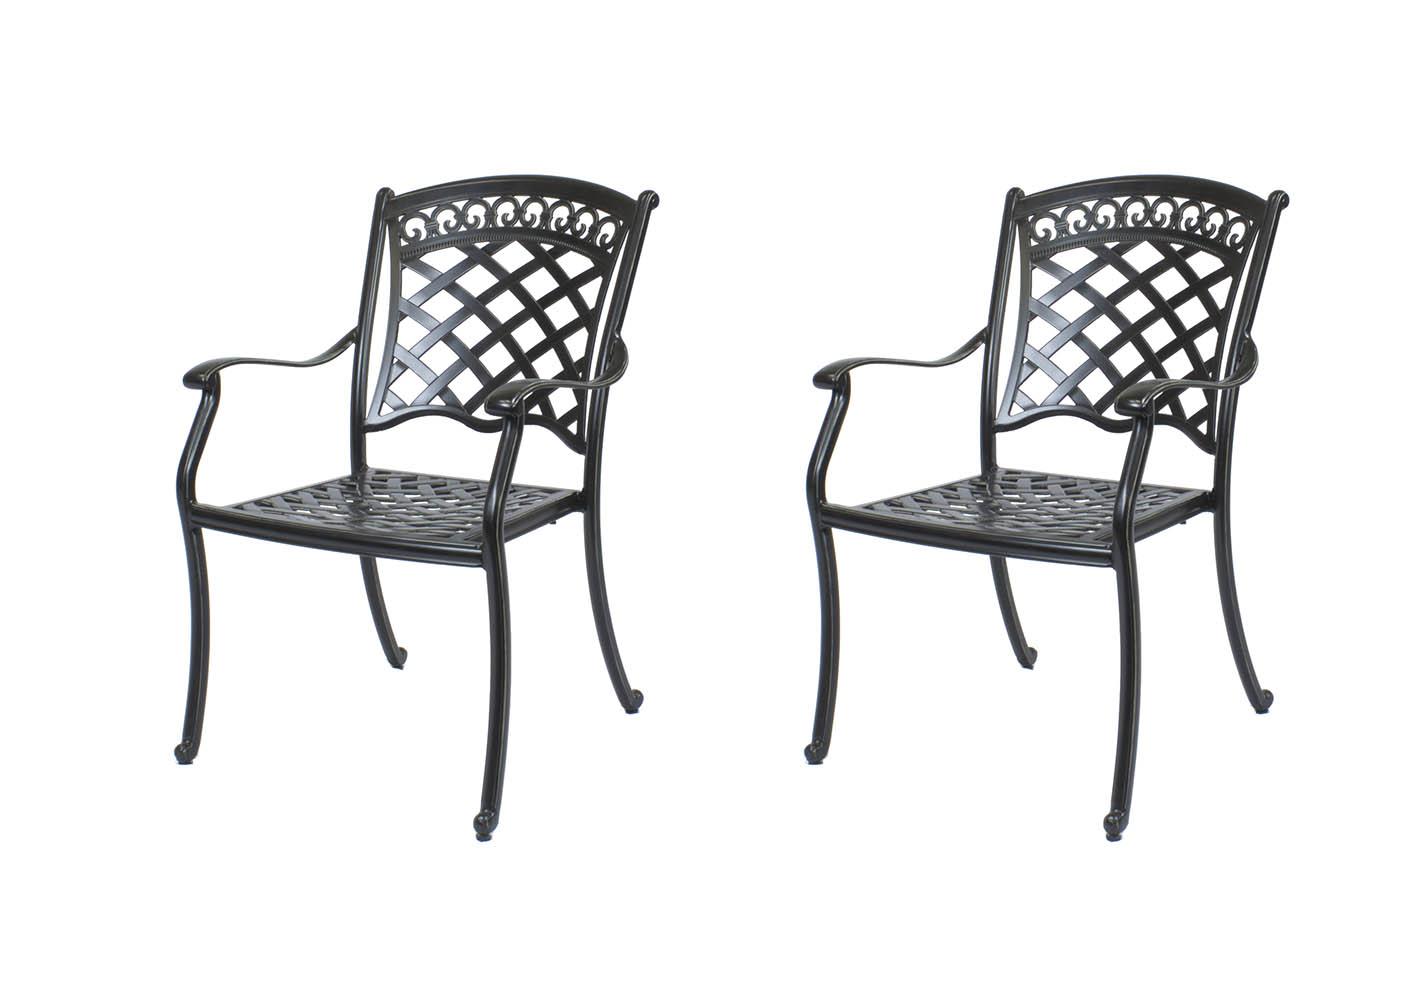 CaliPatio St. Tropez Outdoor Dining Chair